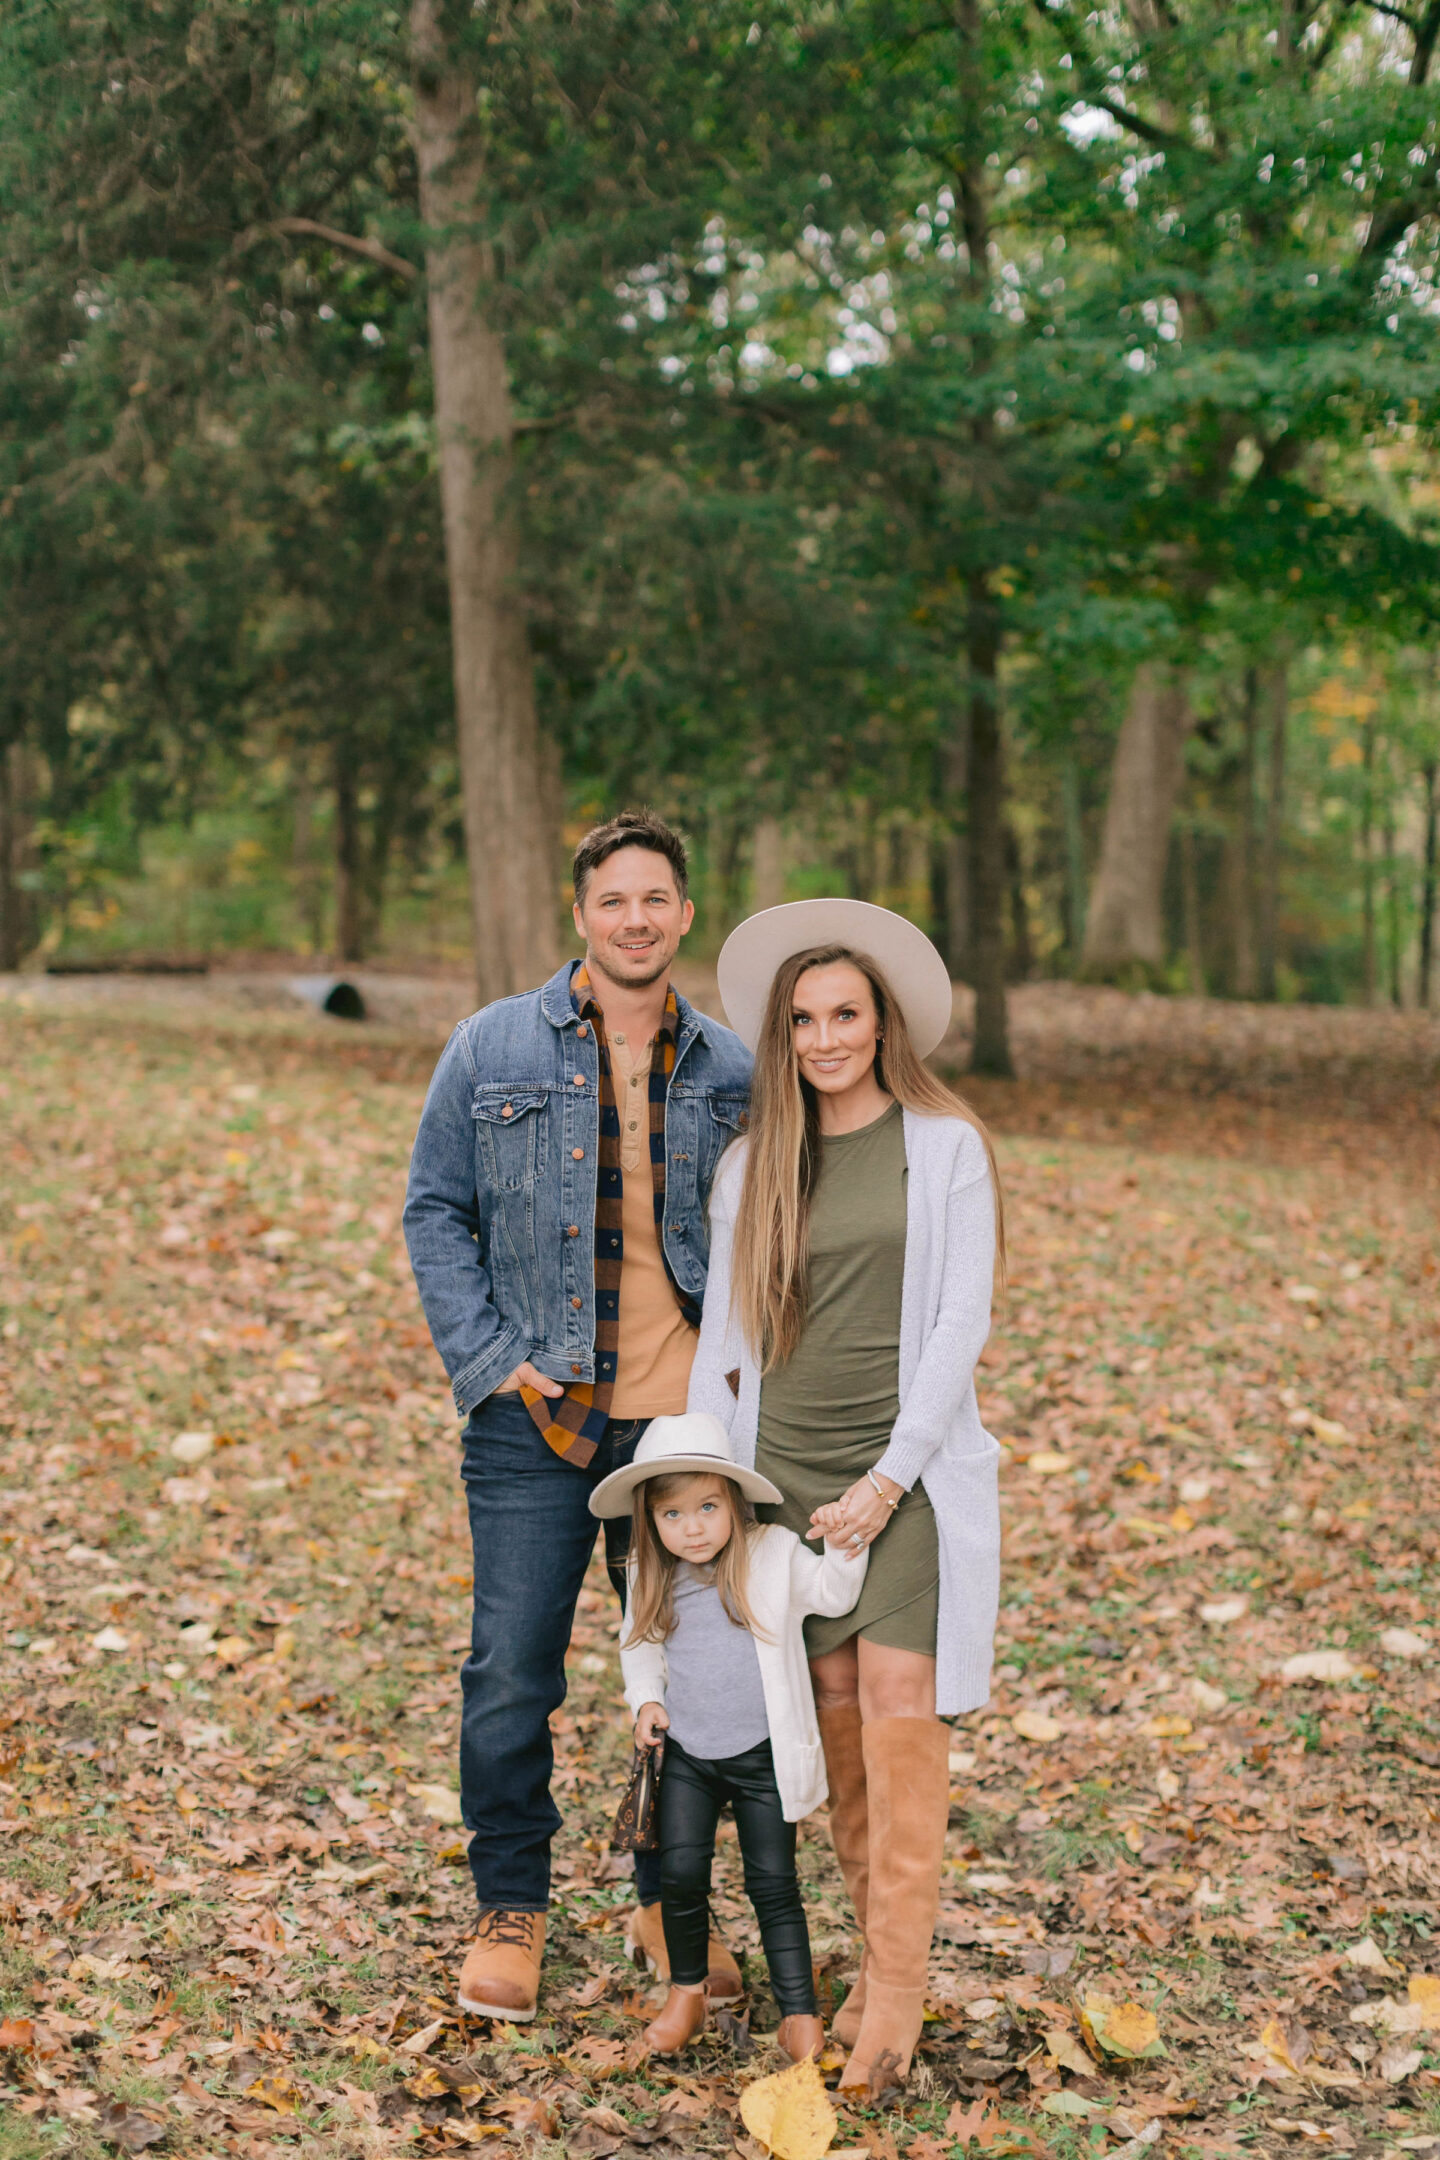 What to Wear for Family Photos – 9 Do’s and Don’ts